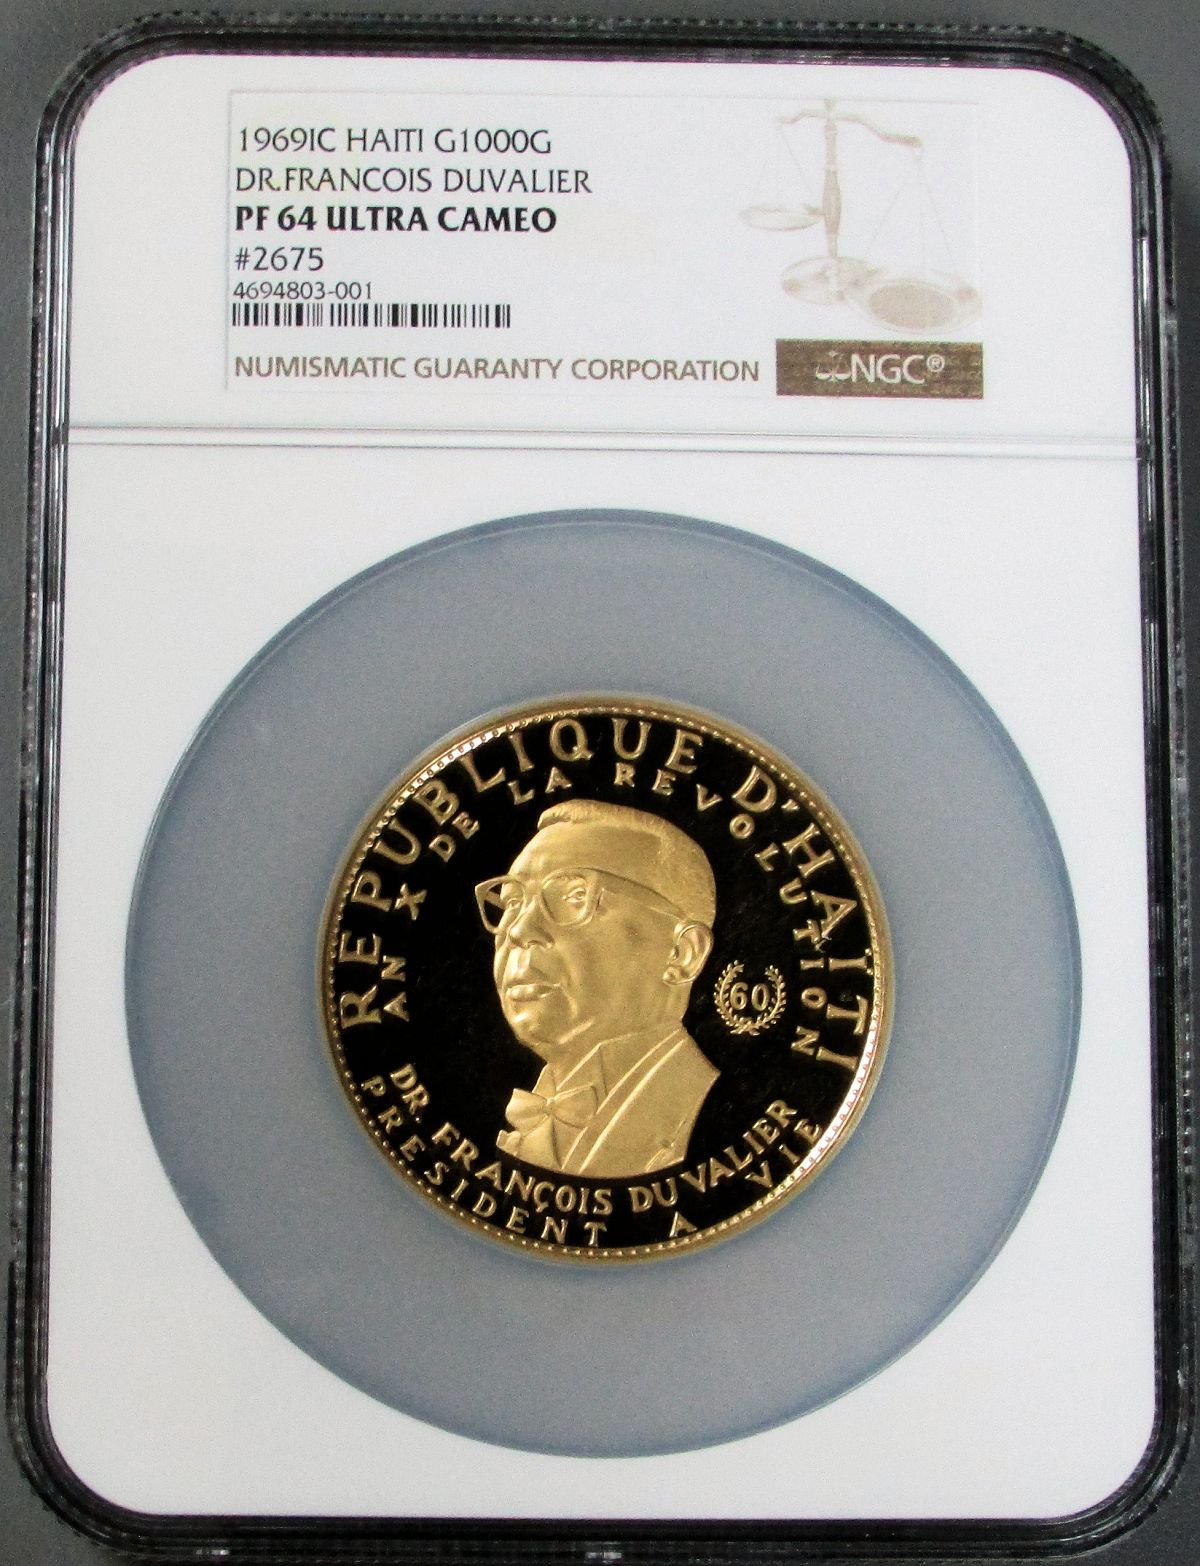 1969 GOLD HAITI 1000 GOURDES NGC PROOF 64 ULTRA CAMEO 140 MINTED  "PAPA DOC" DR FRANCOIS DUVALIER"